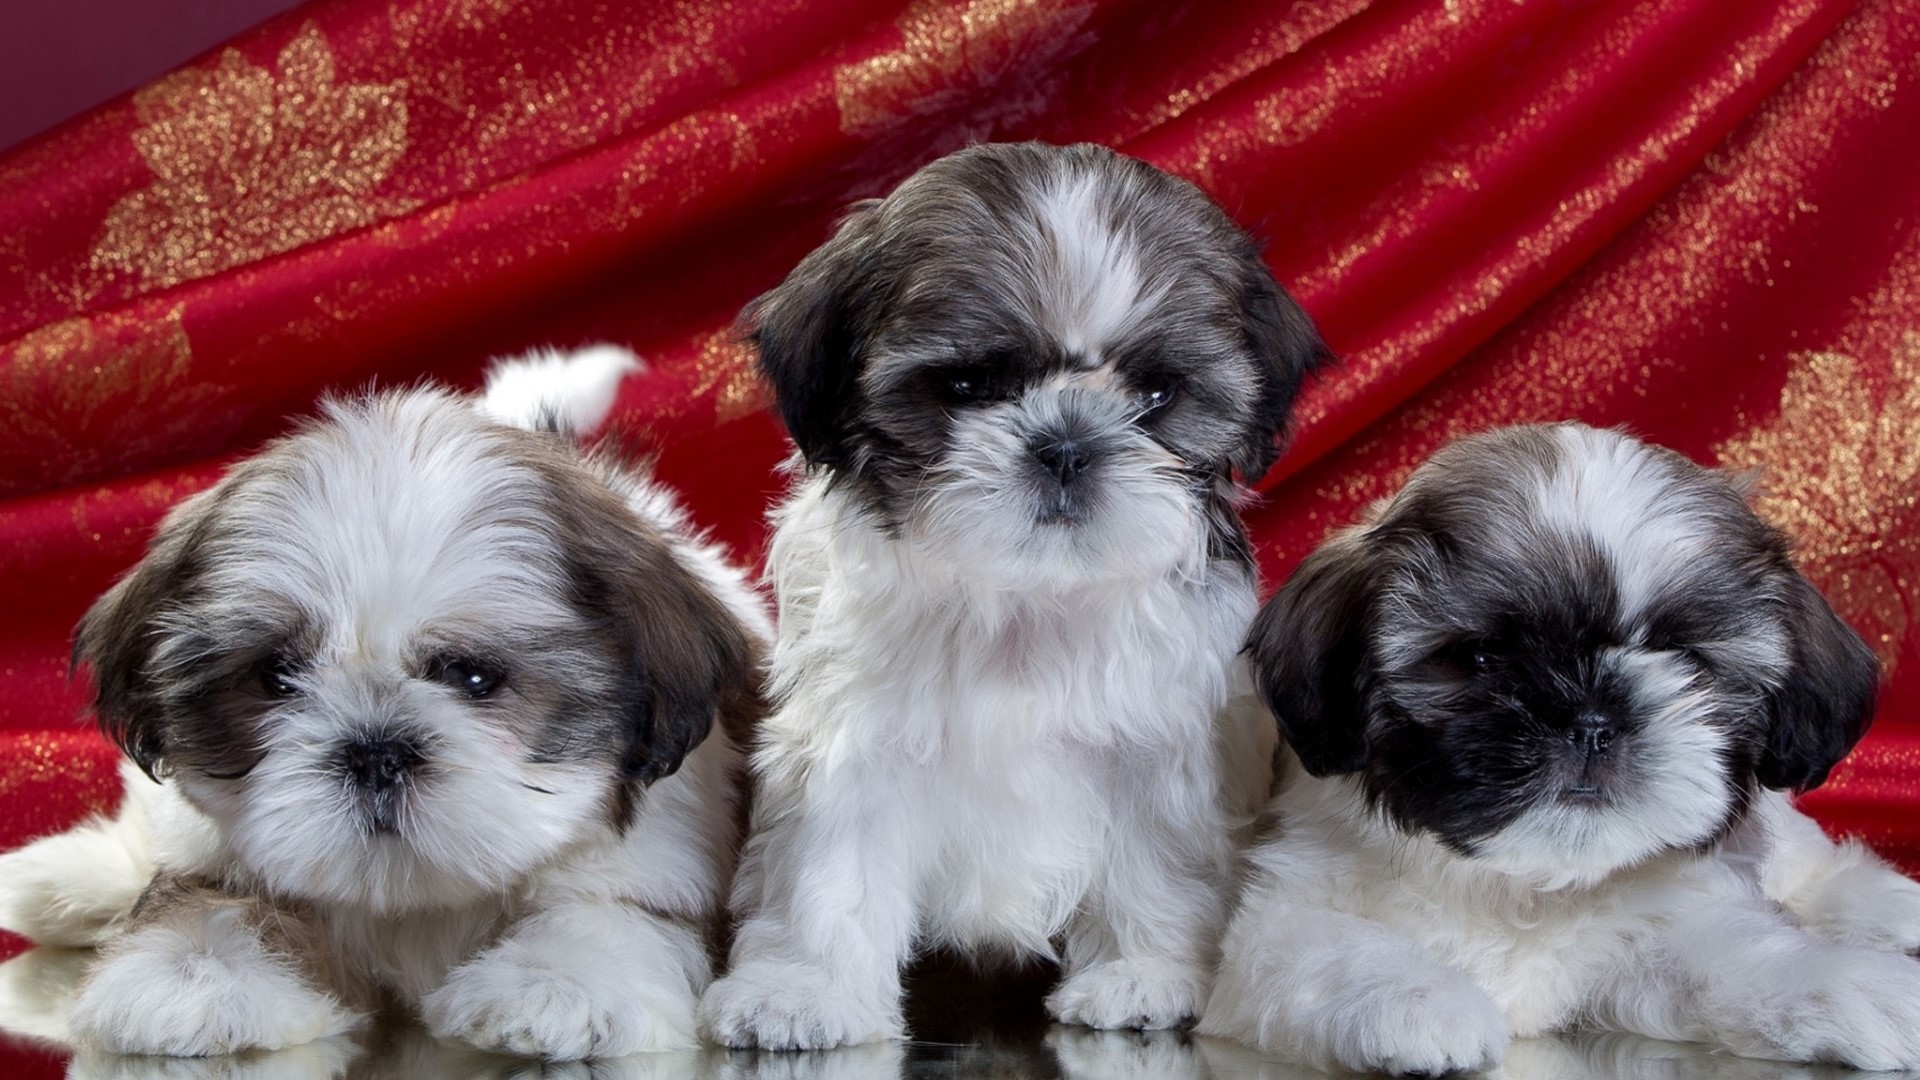 Download shih tzu s for ile phone free shih tzu hd pictures